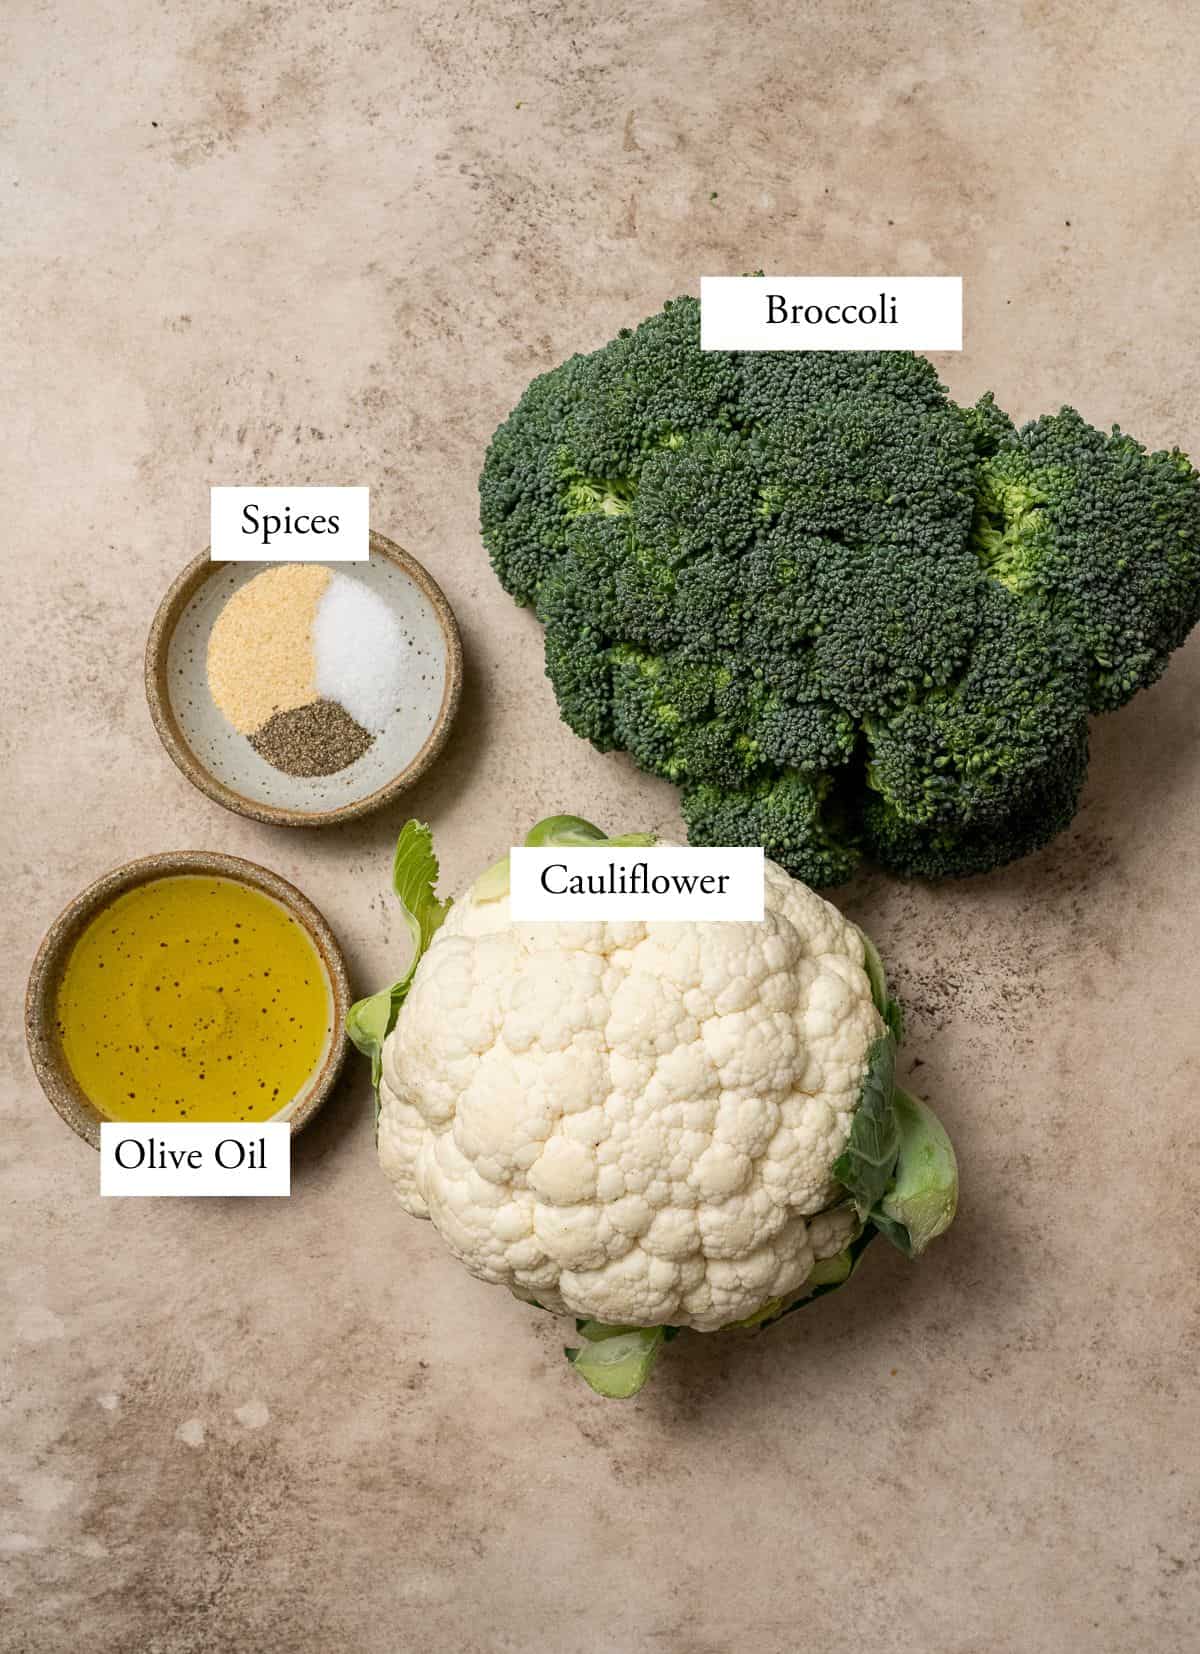 ingredients for air fryer broccoli and cauliflower, labeled.